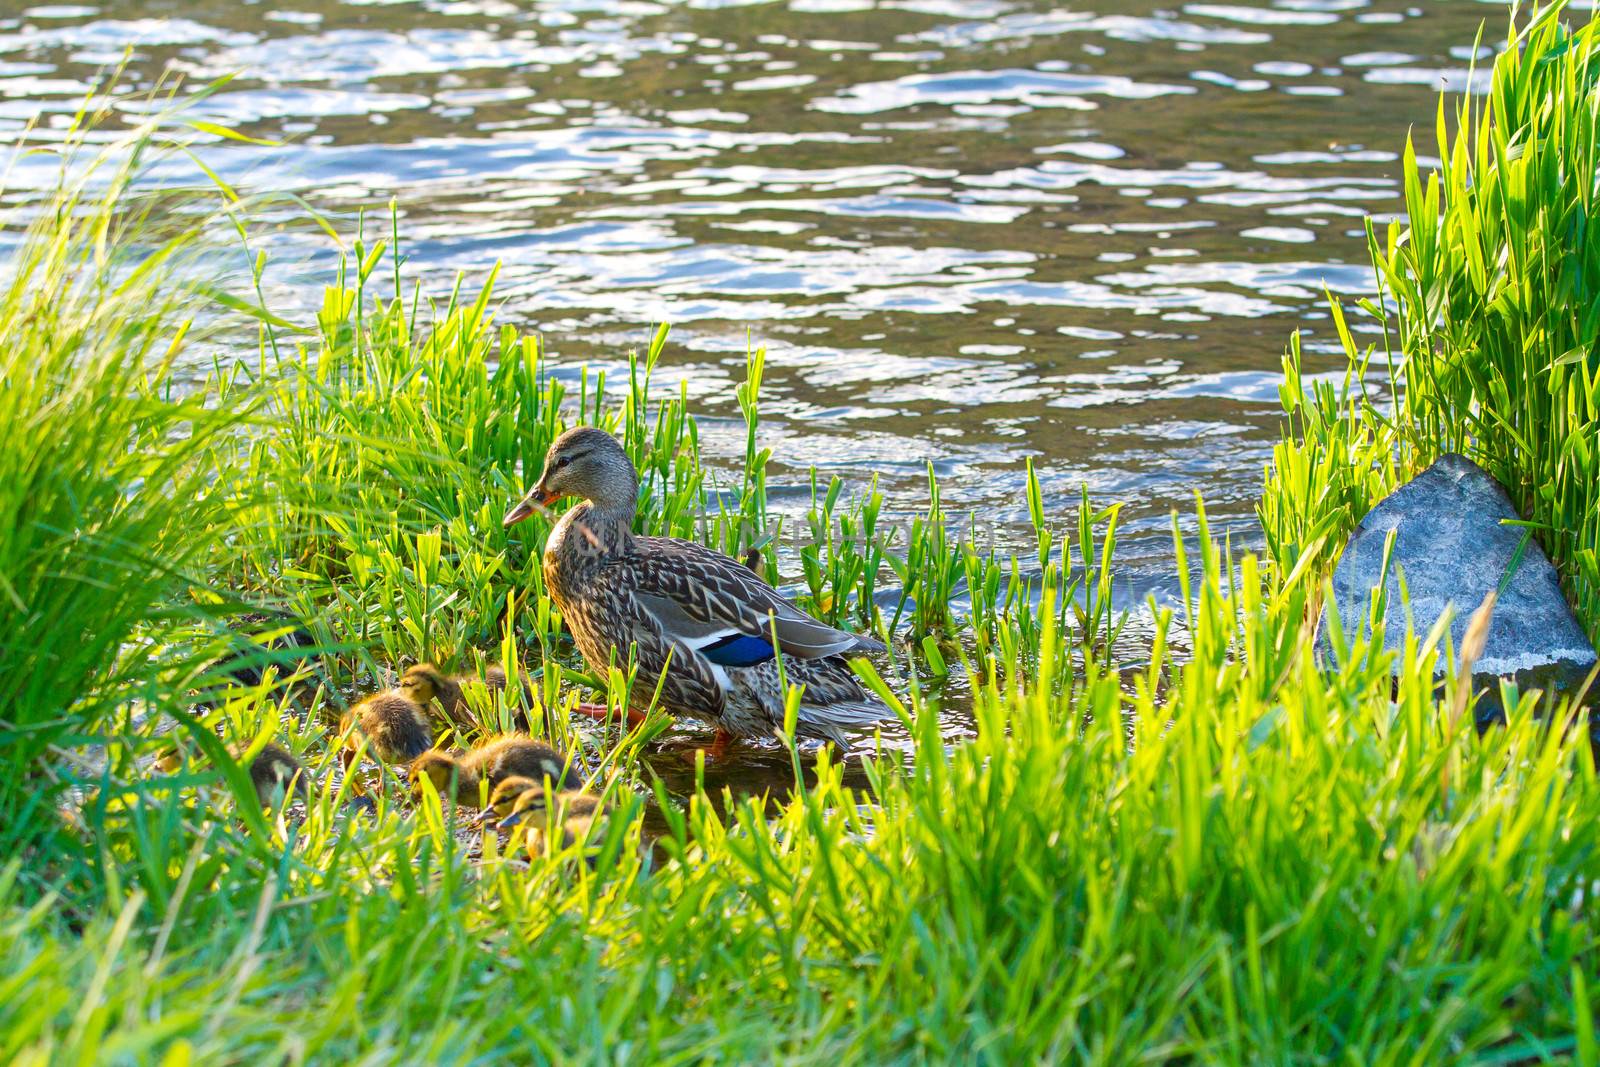 A protective mother duck guards her chicks from predators in the grass along this rvier bank.